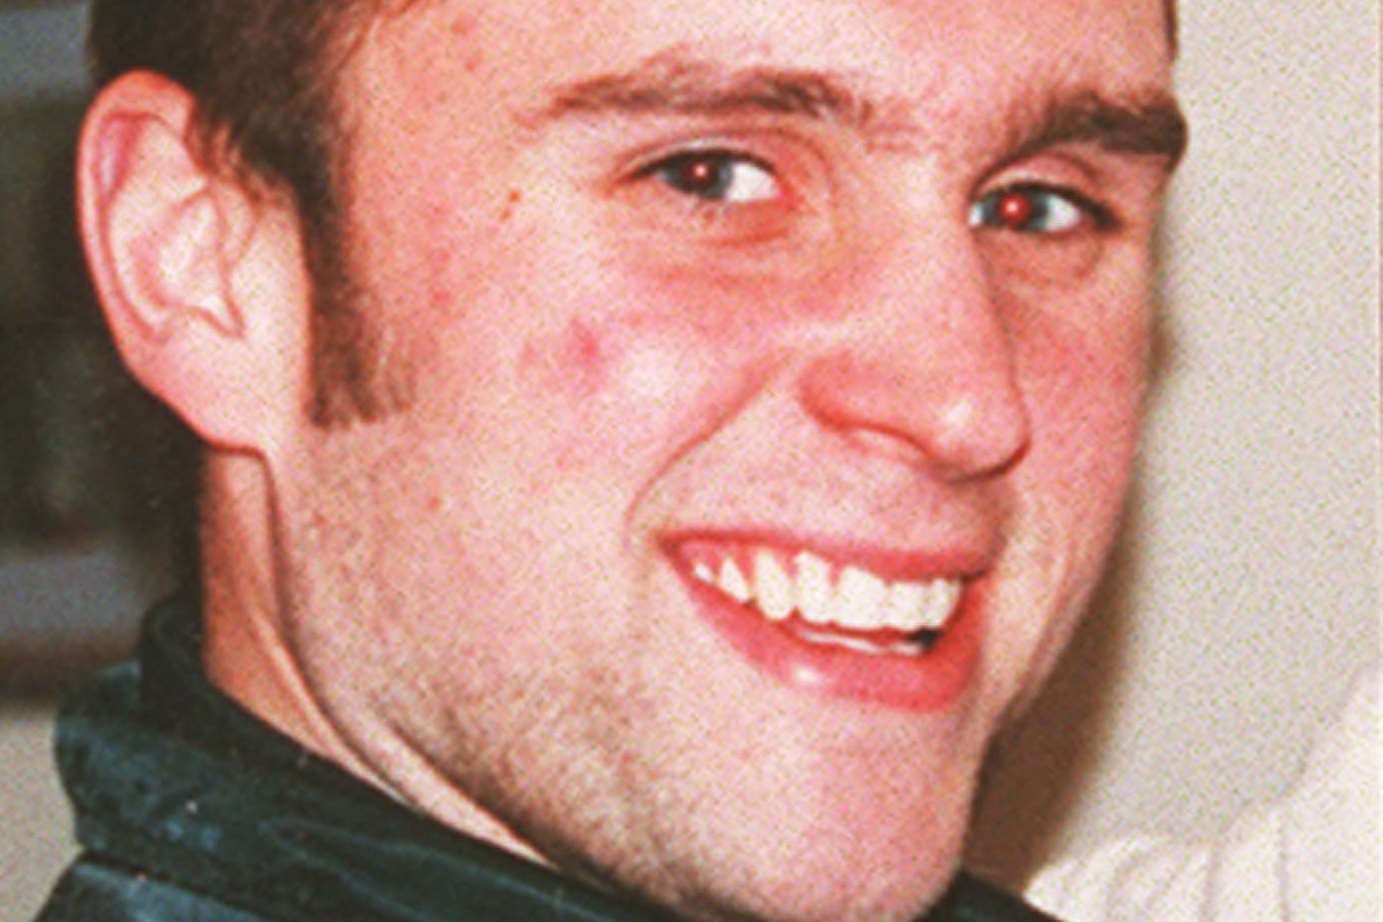 Stephen Cameron, killed by Noye in a road rage incident